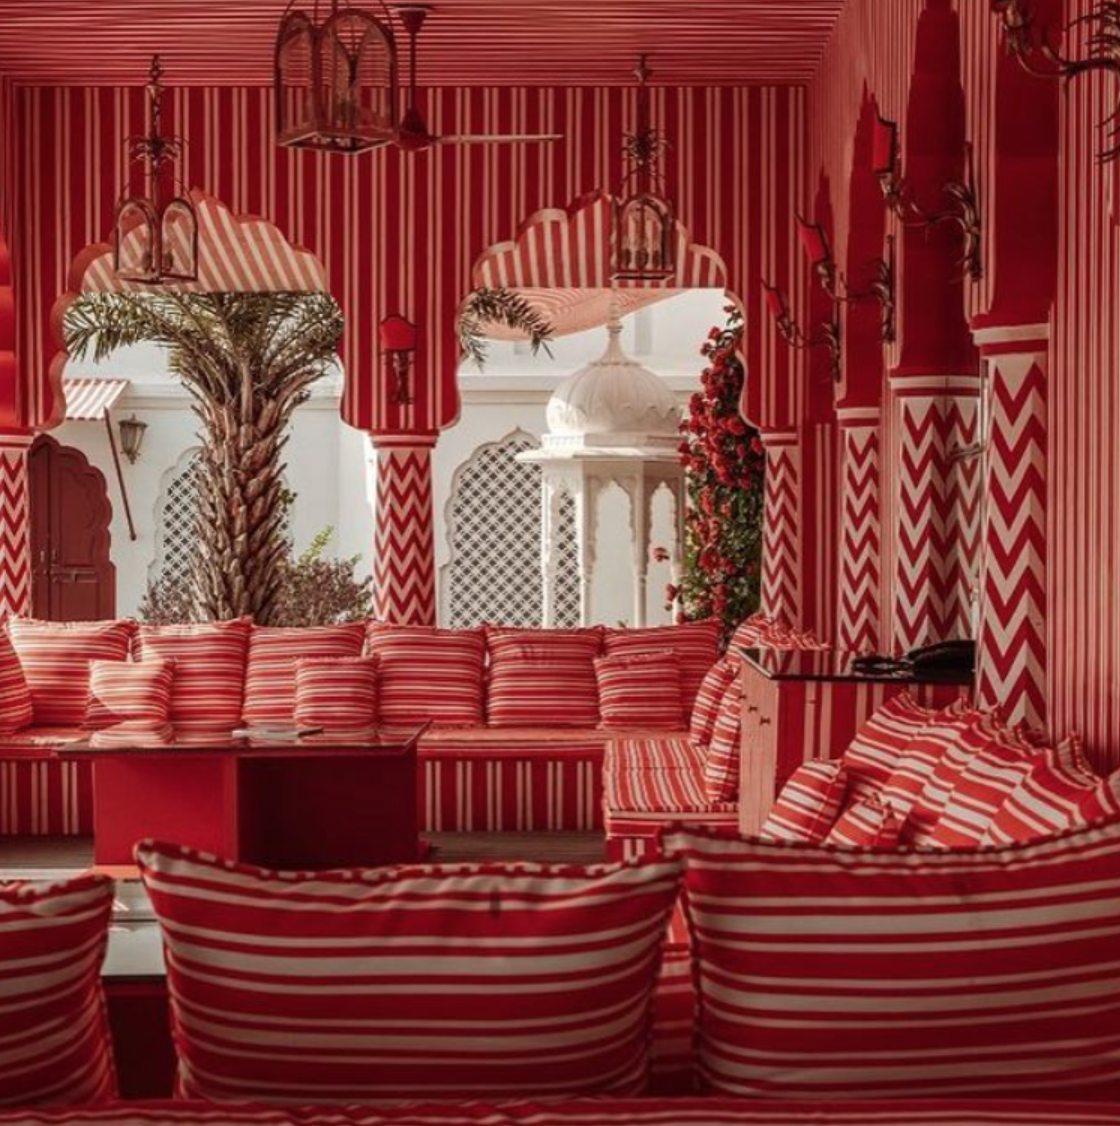 5 hotels that nail Wes Anderson's aesthetic